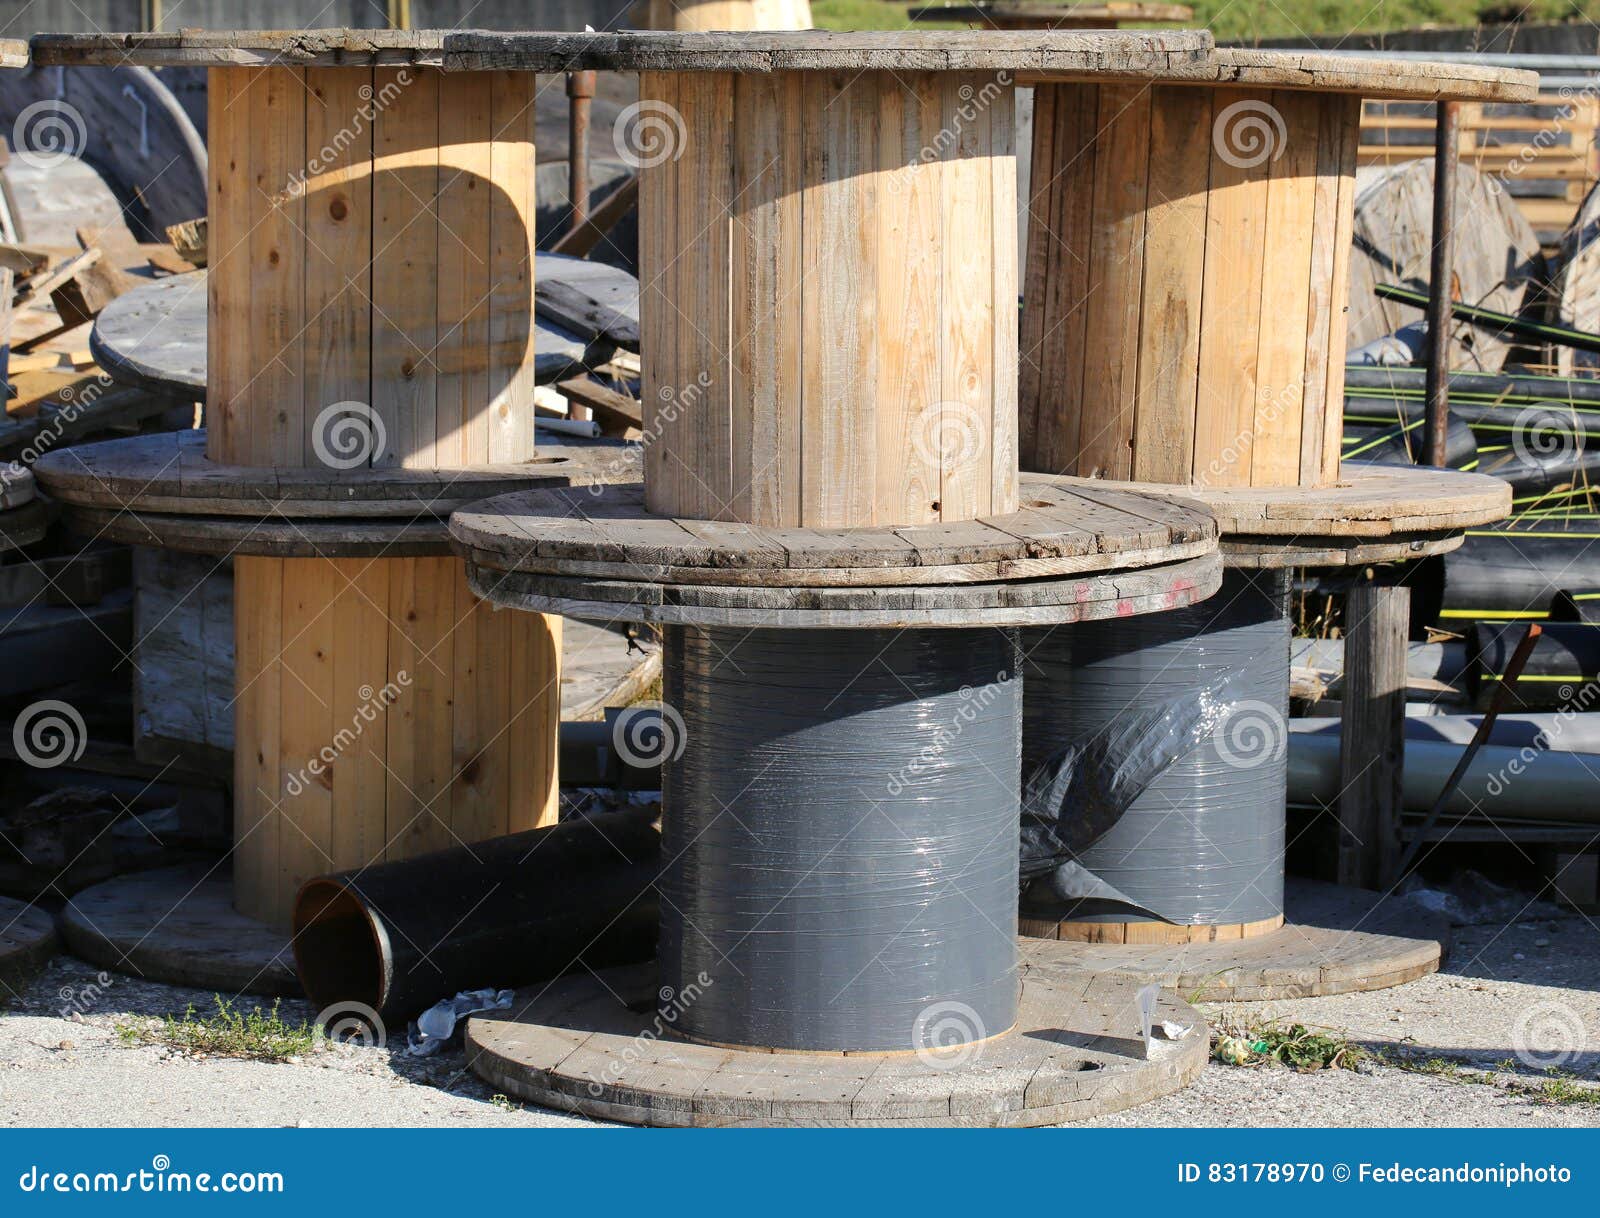 Many Wooden Reels for Electrical Cables in Landfill Stock Photo - Image ...